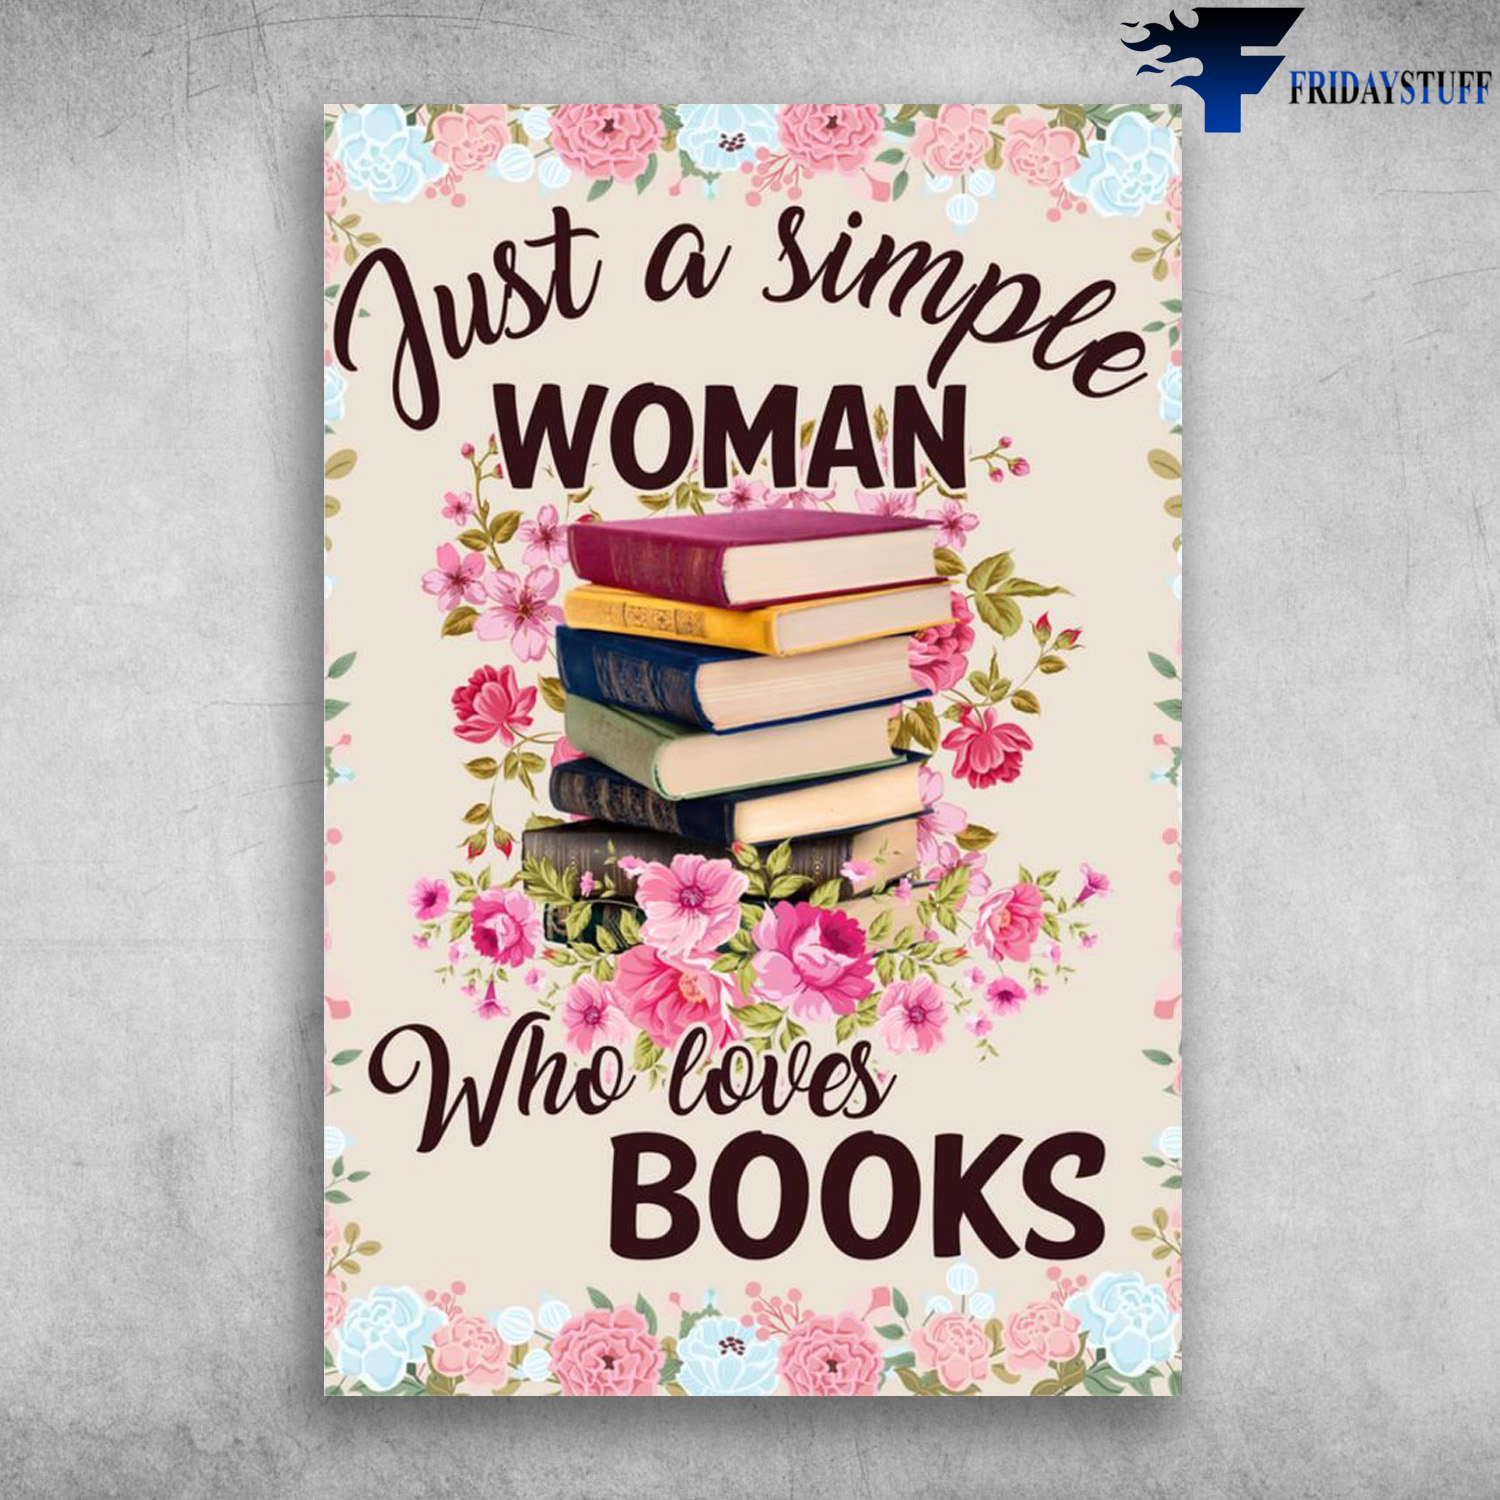 The Books - Just A Simple Woman, Who Loves Books